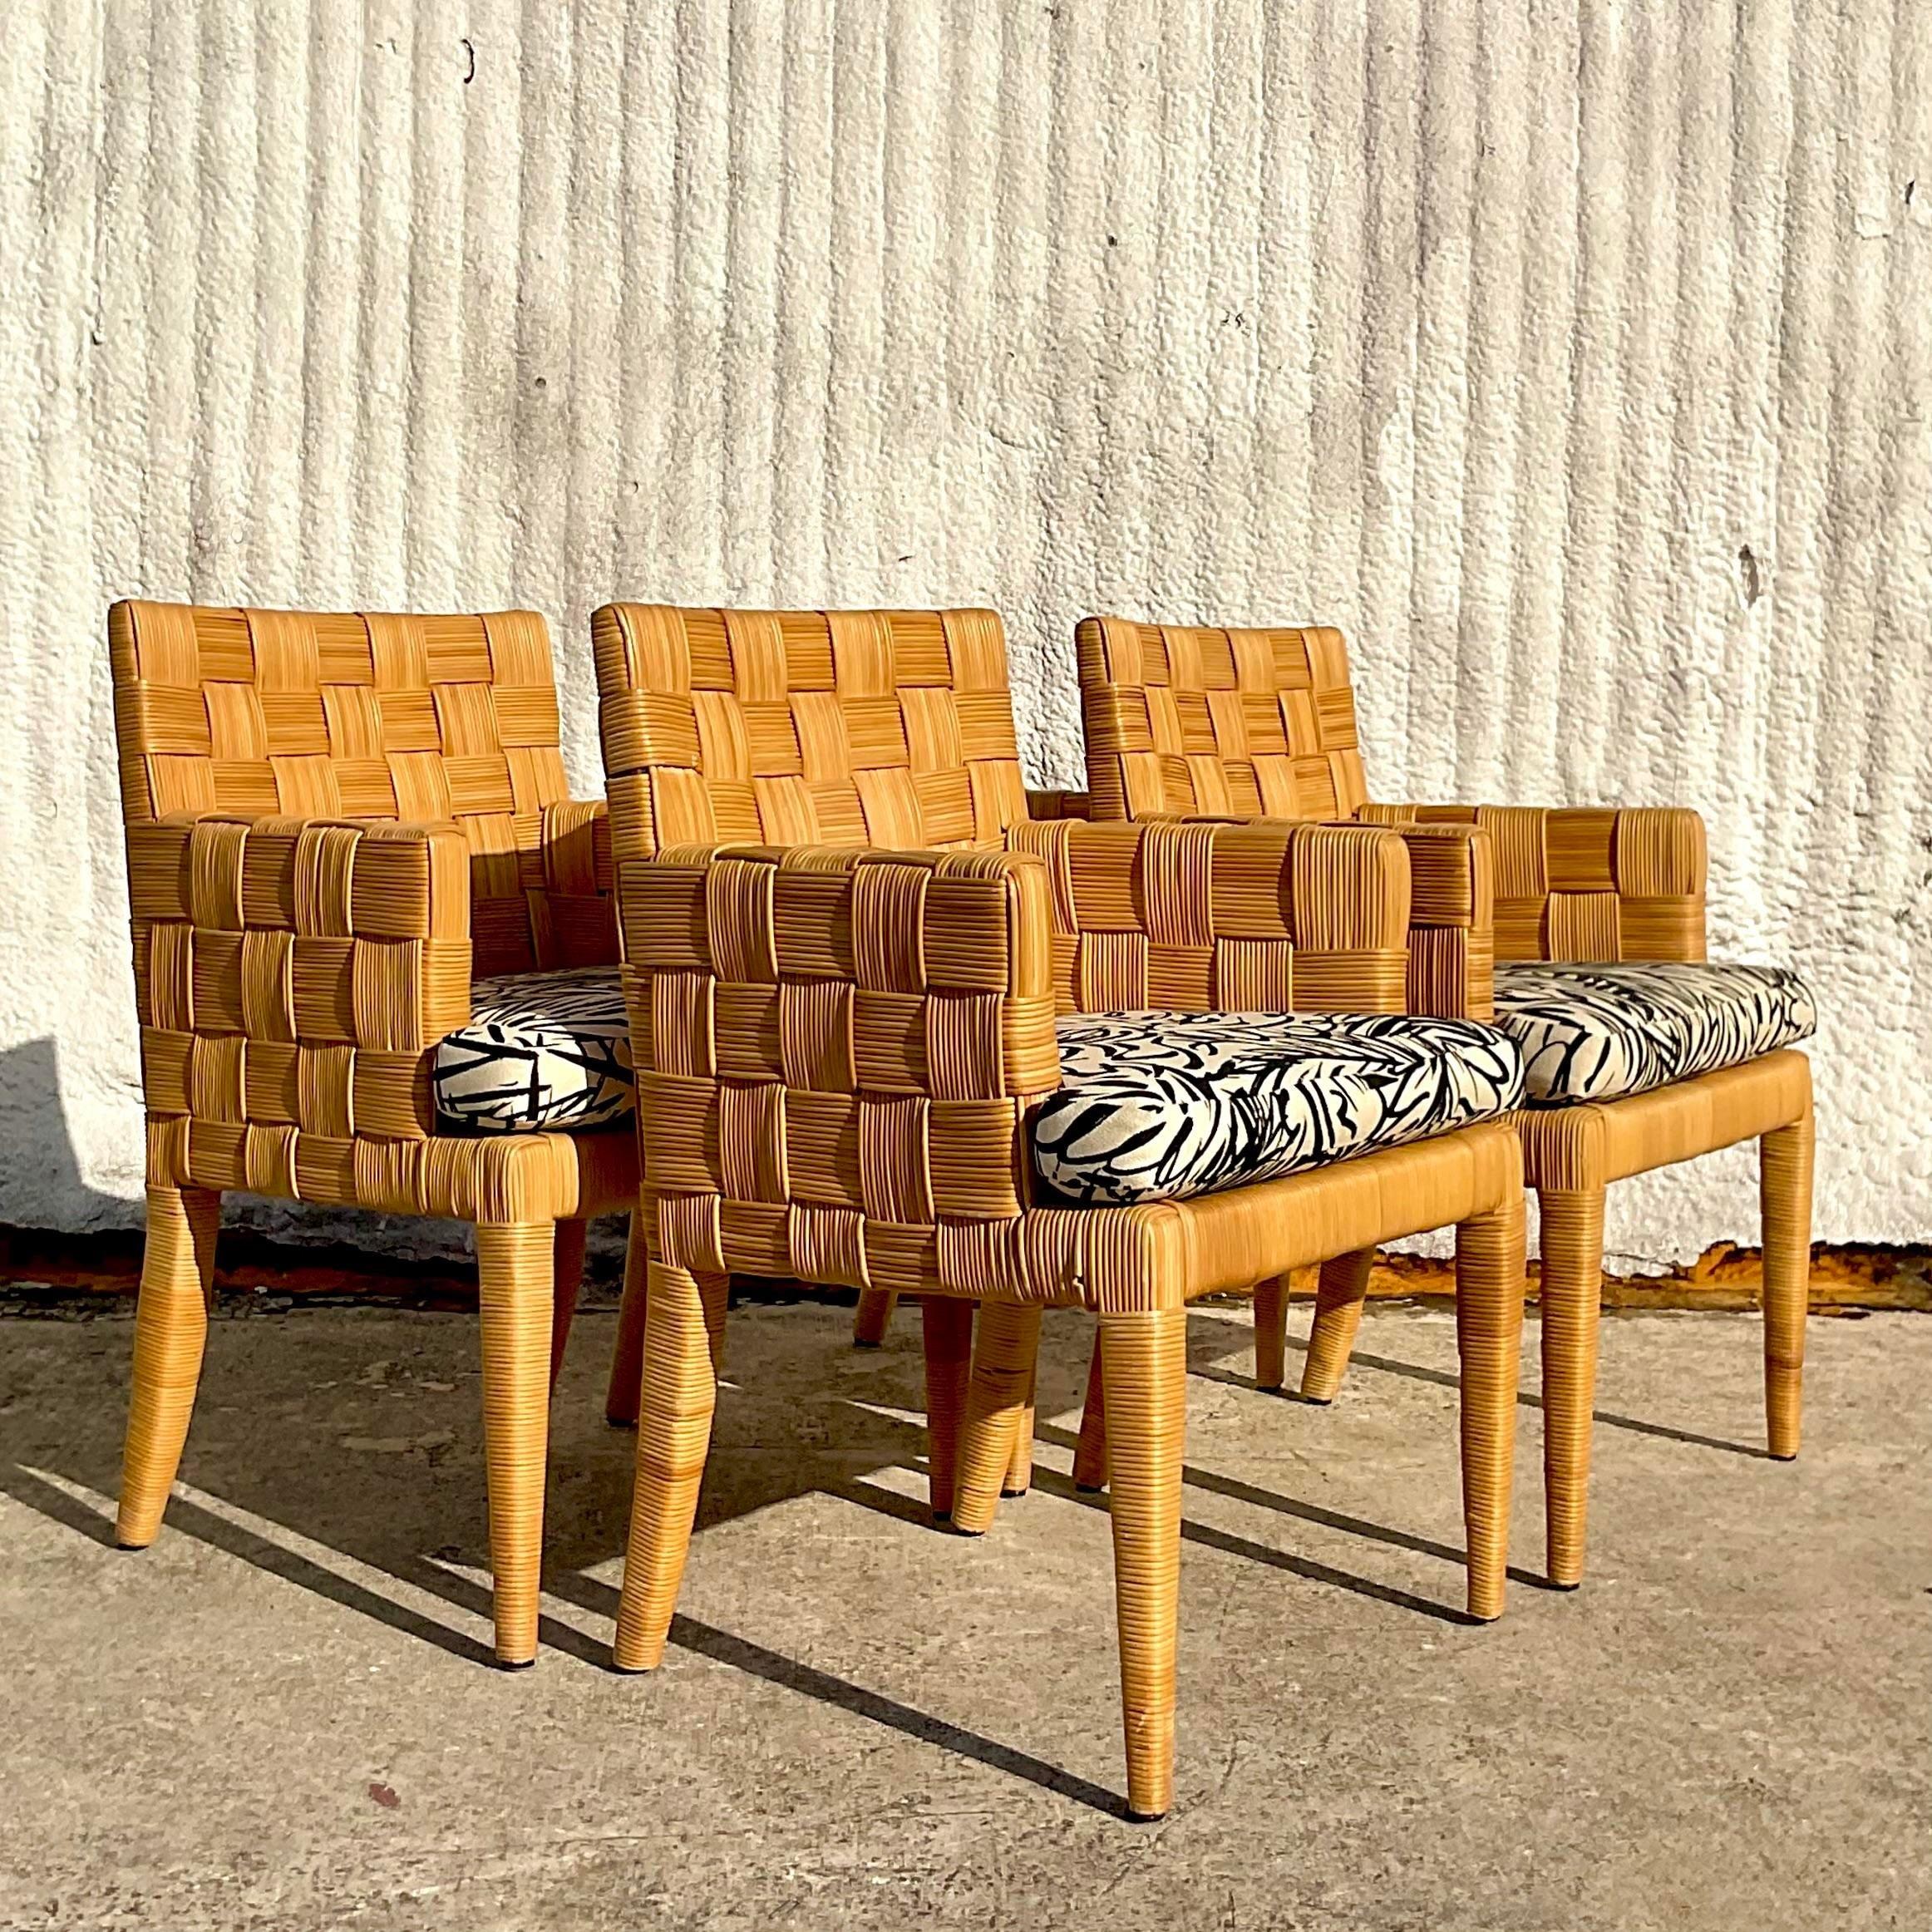 Upholstery Vintage Coastal Donghia “Block Island” Arm Chairs - Set of Four